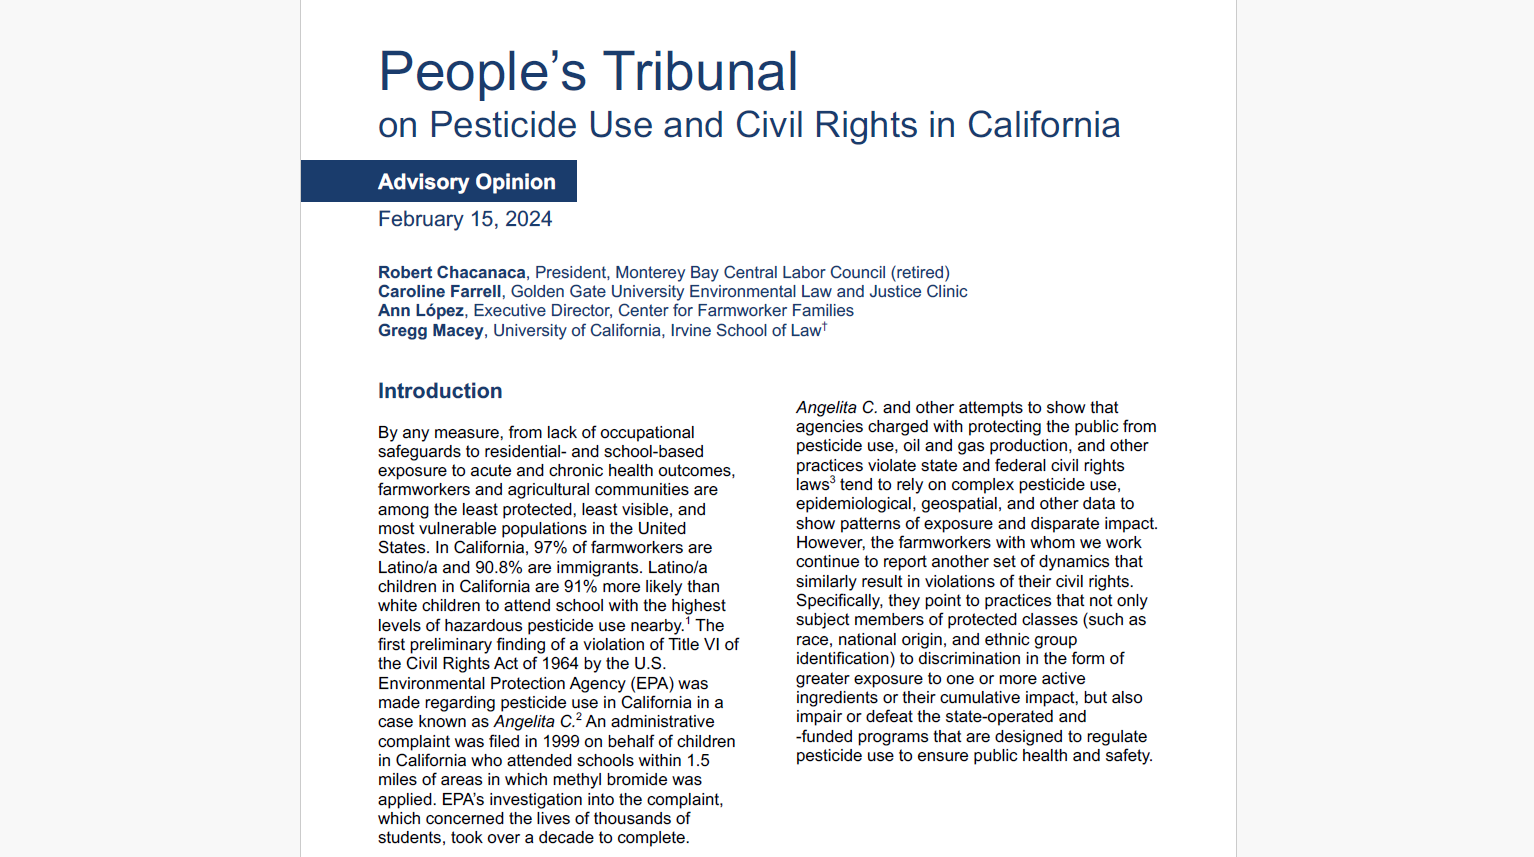 CLEANR research and advisory opinion outline severe, pervasive, and ongoing civil rights violations by pesticide regulatory agencies in California